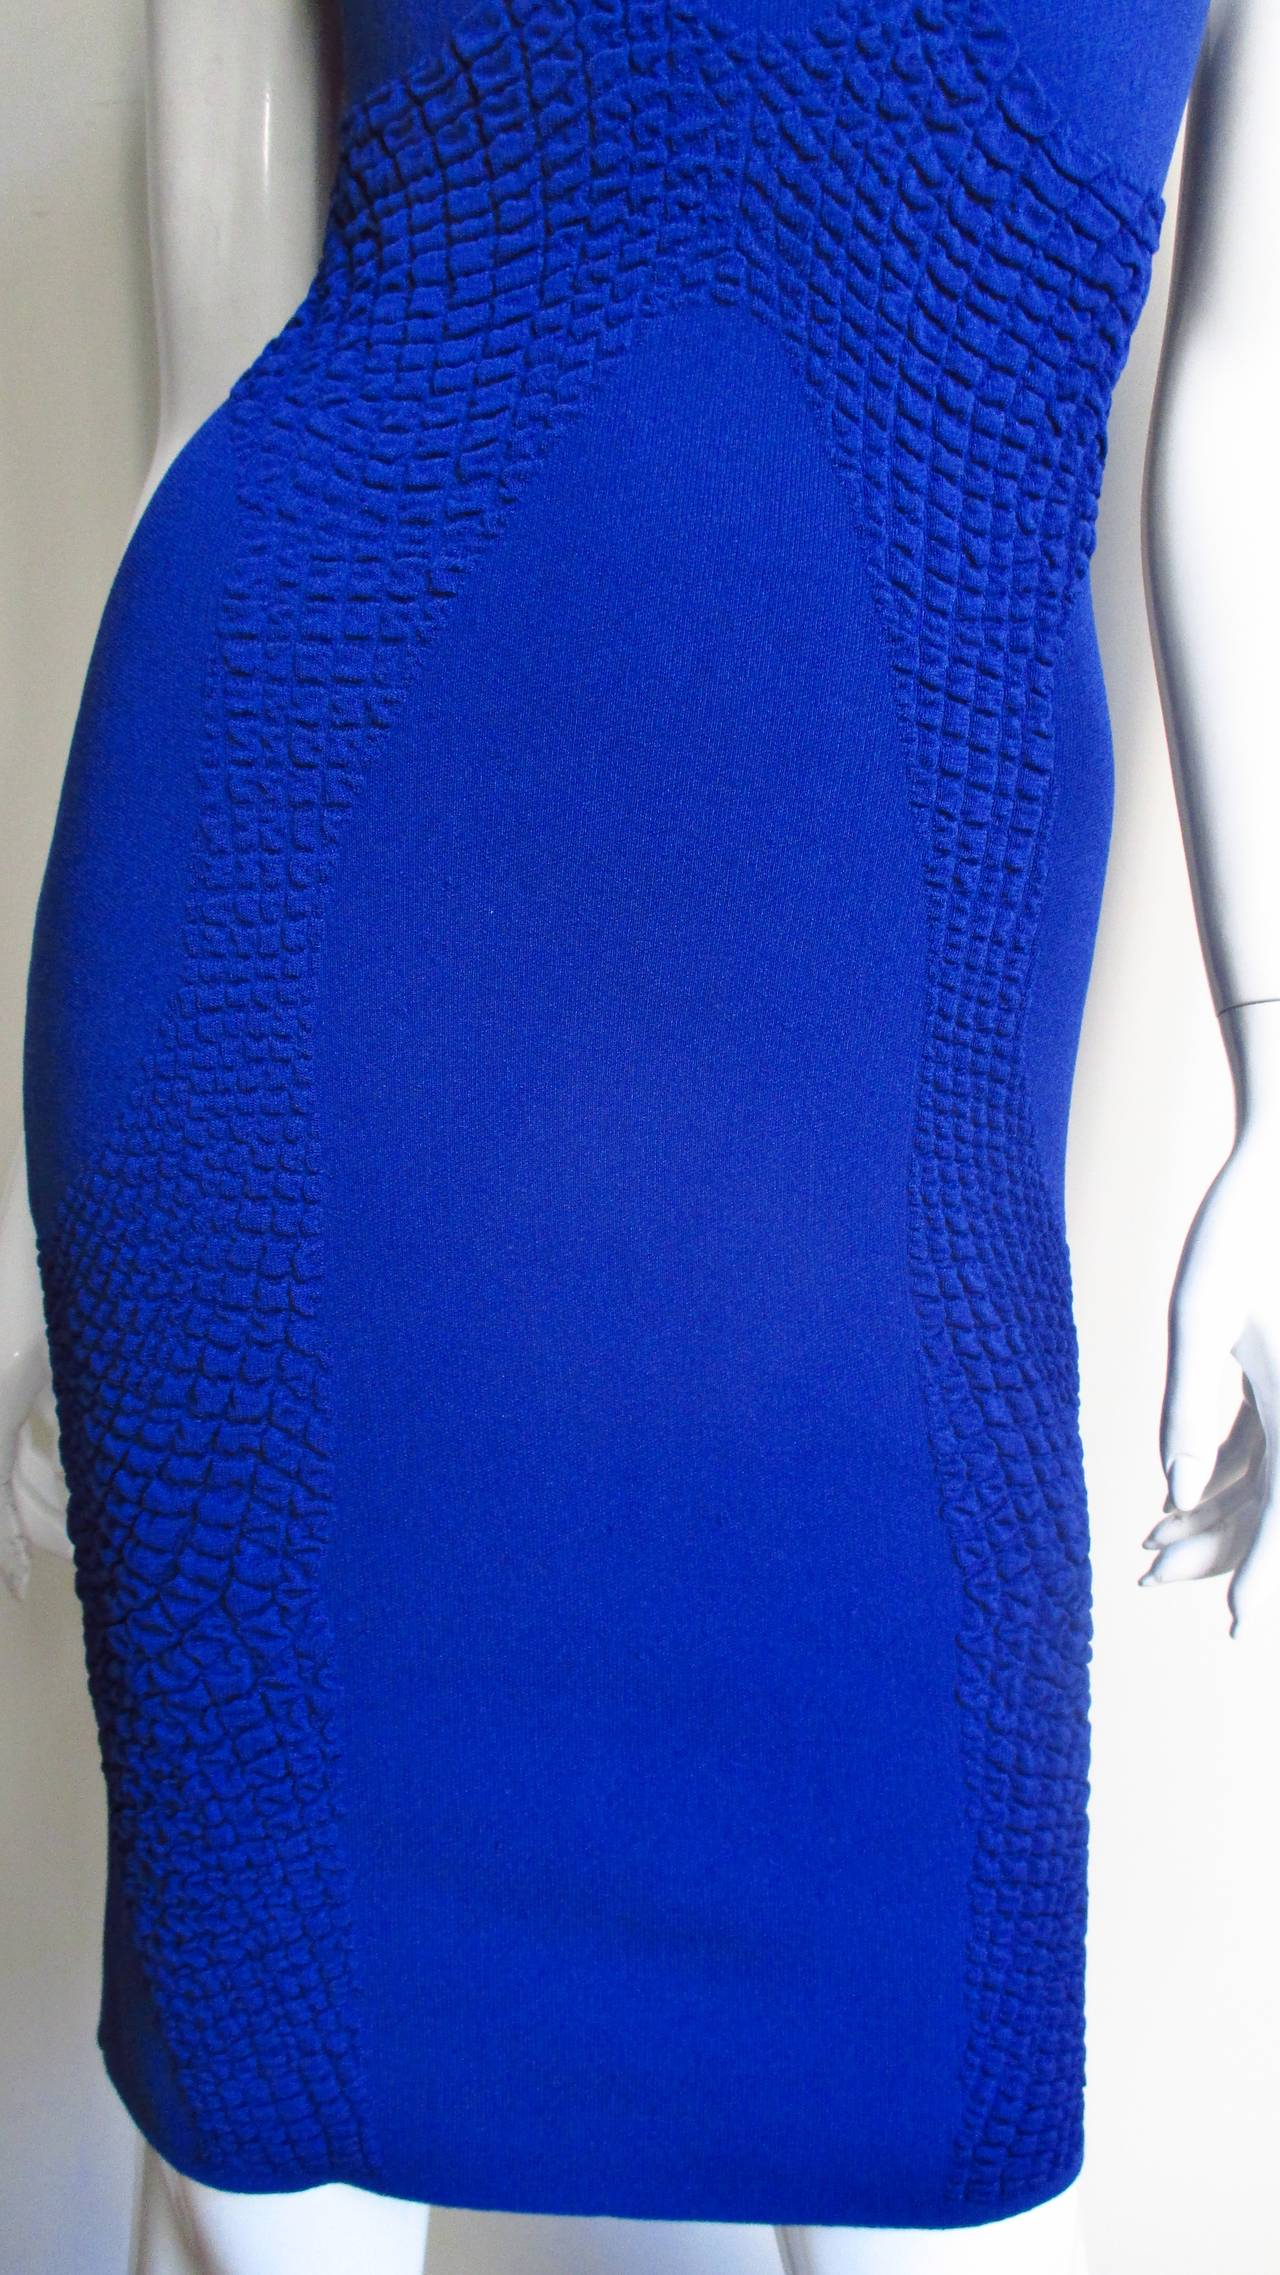 Alexander McQueen Blue Bodycon Dress In Excellent Condition For Sale In Water Mill, NY